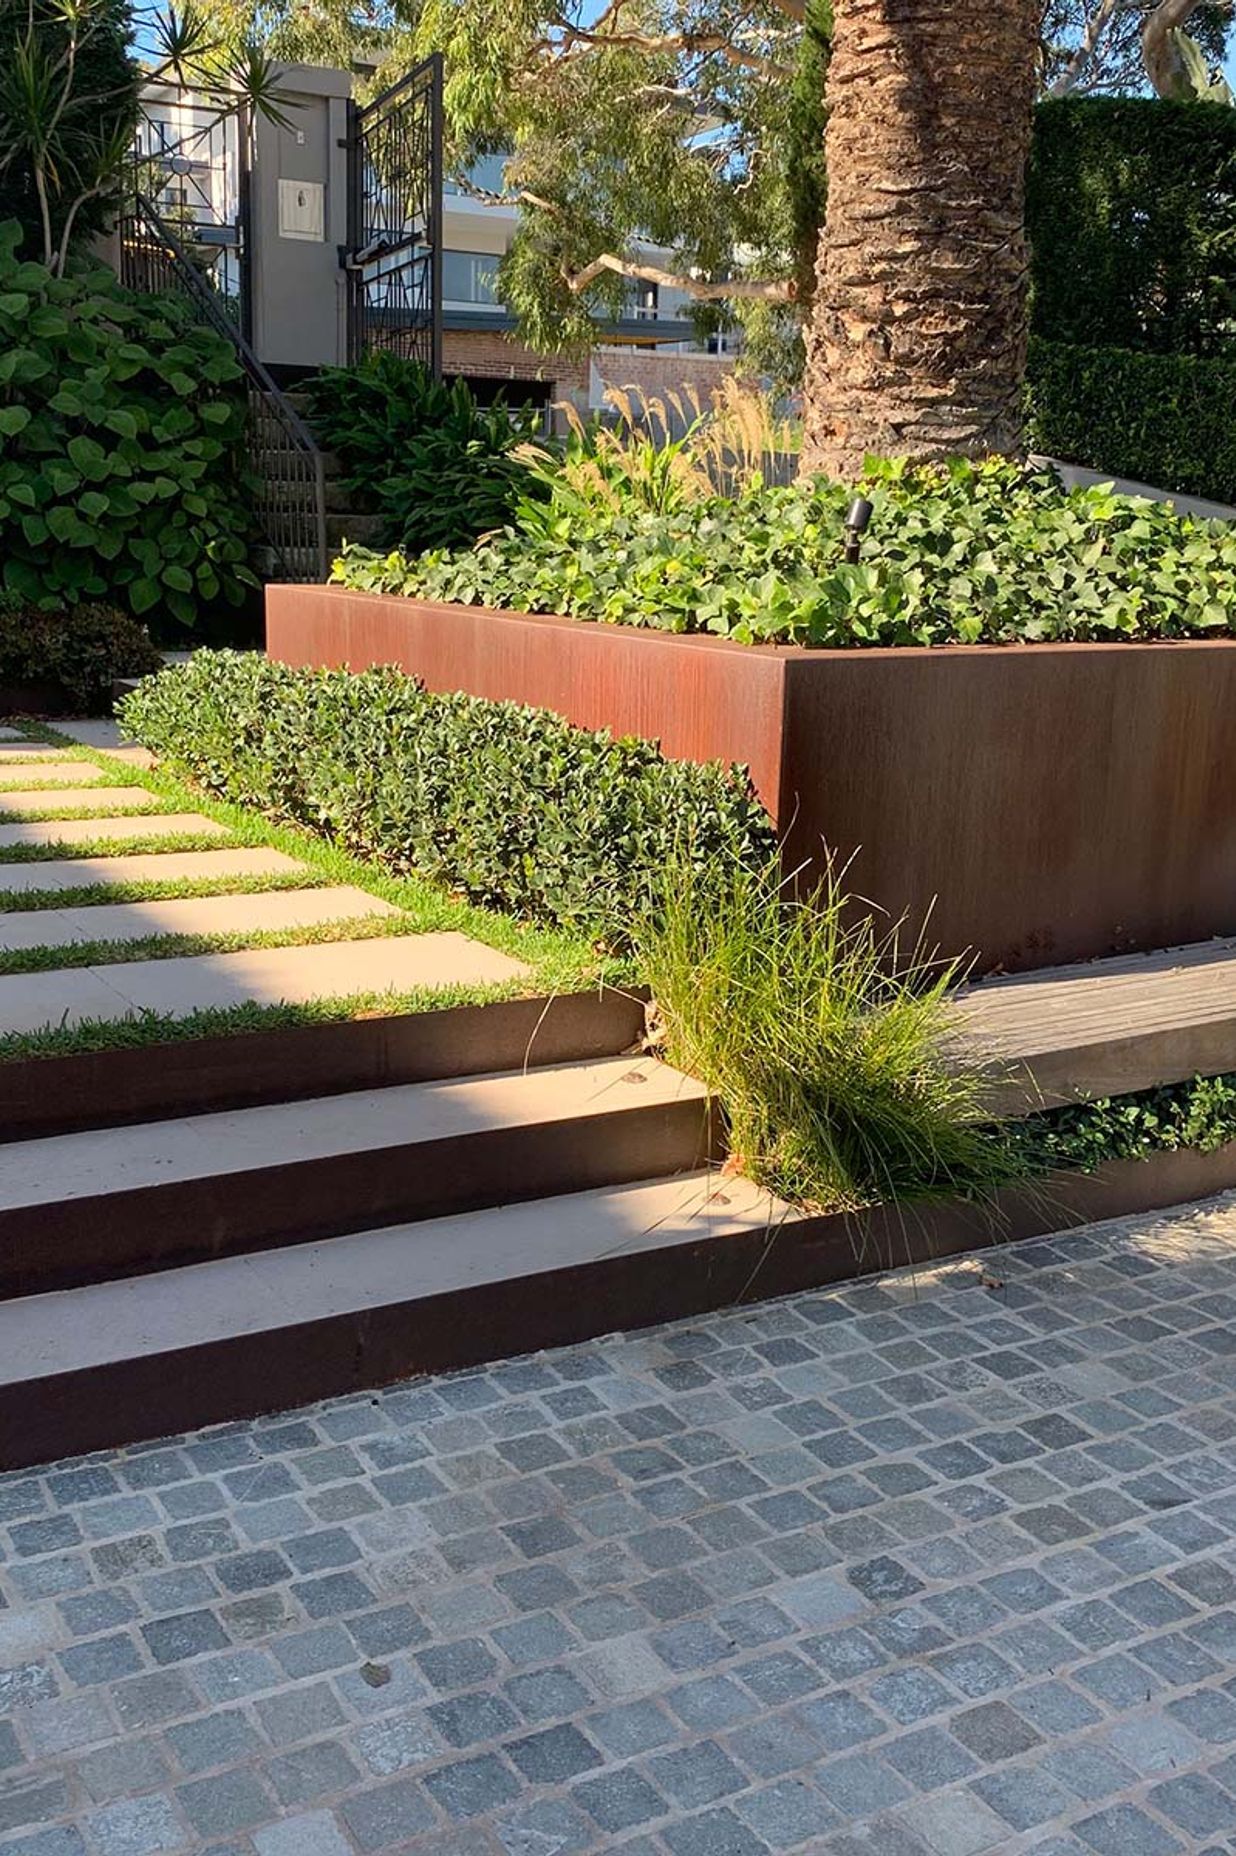 The Big Steel: Why everyone is in love with the weathered good looks of Corten